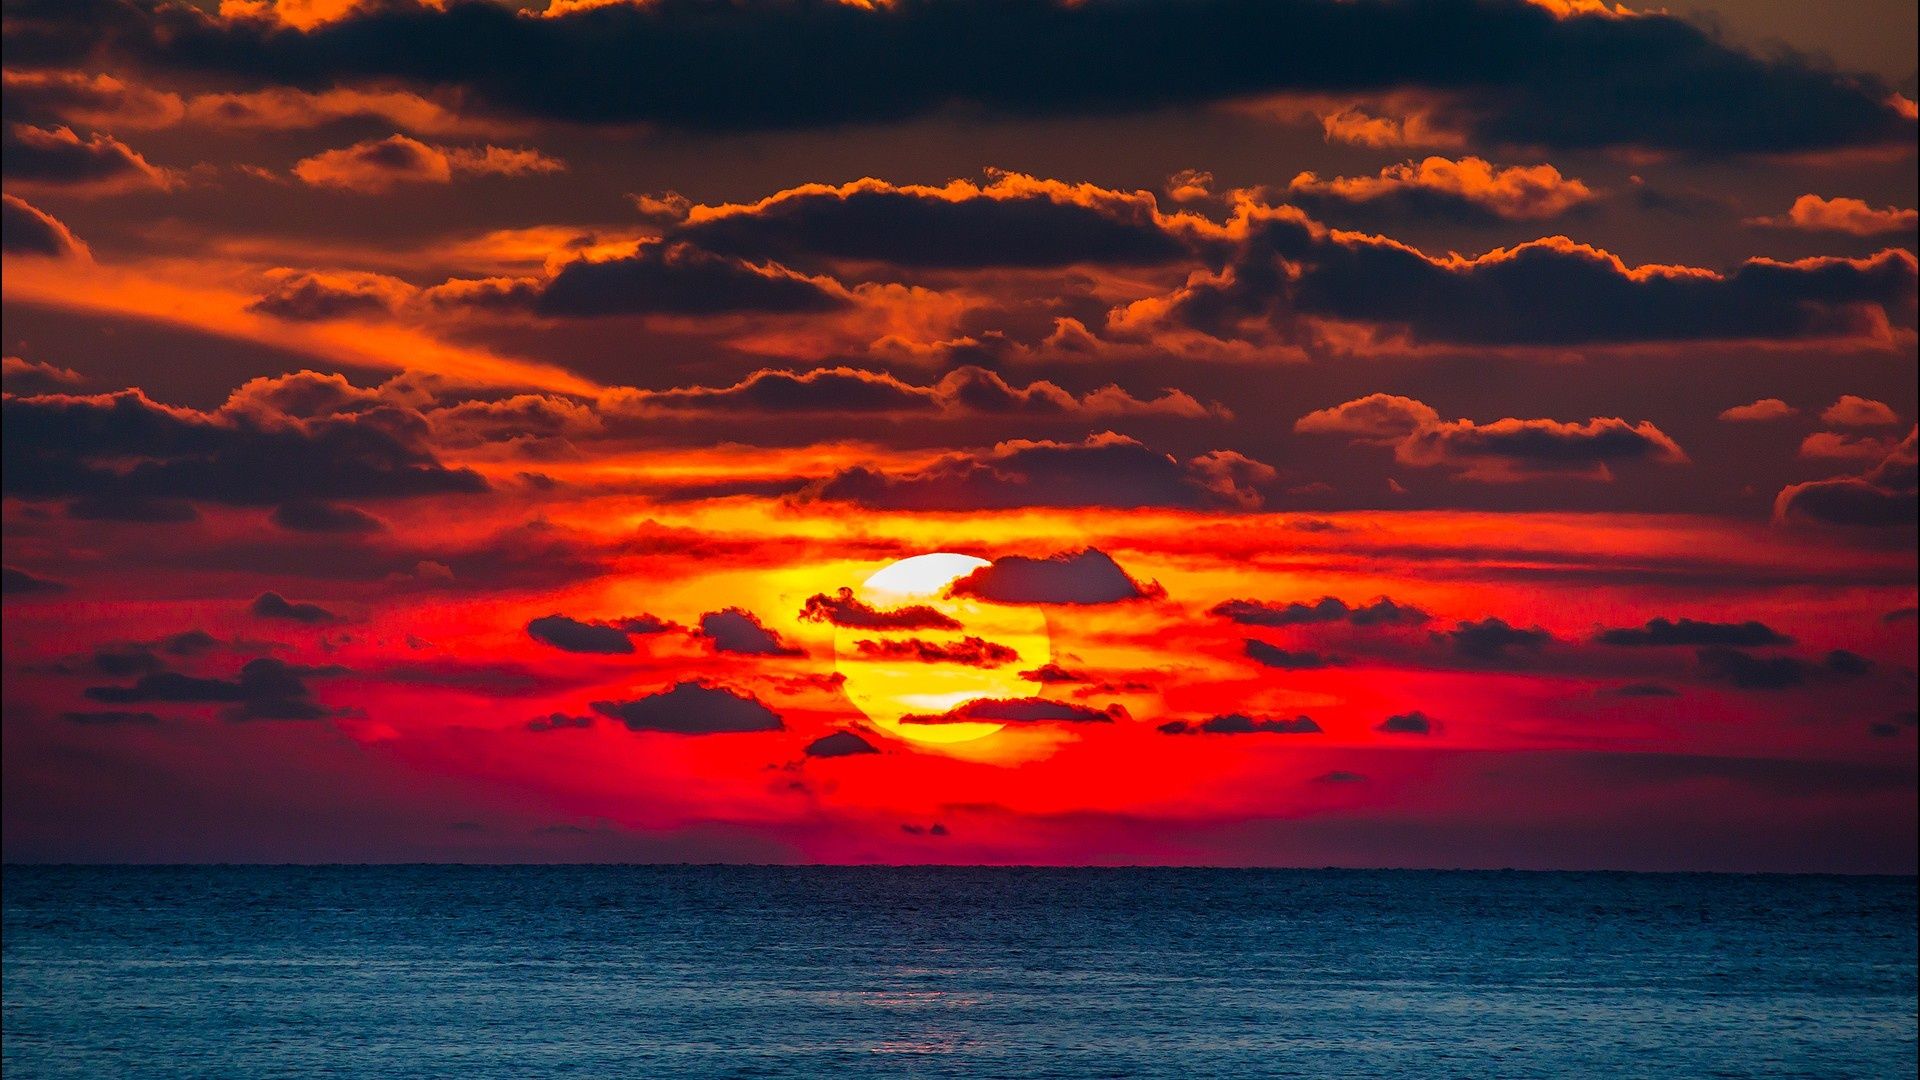 Sun going down over the ocean HD Wallpaper. Background Image